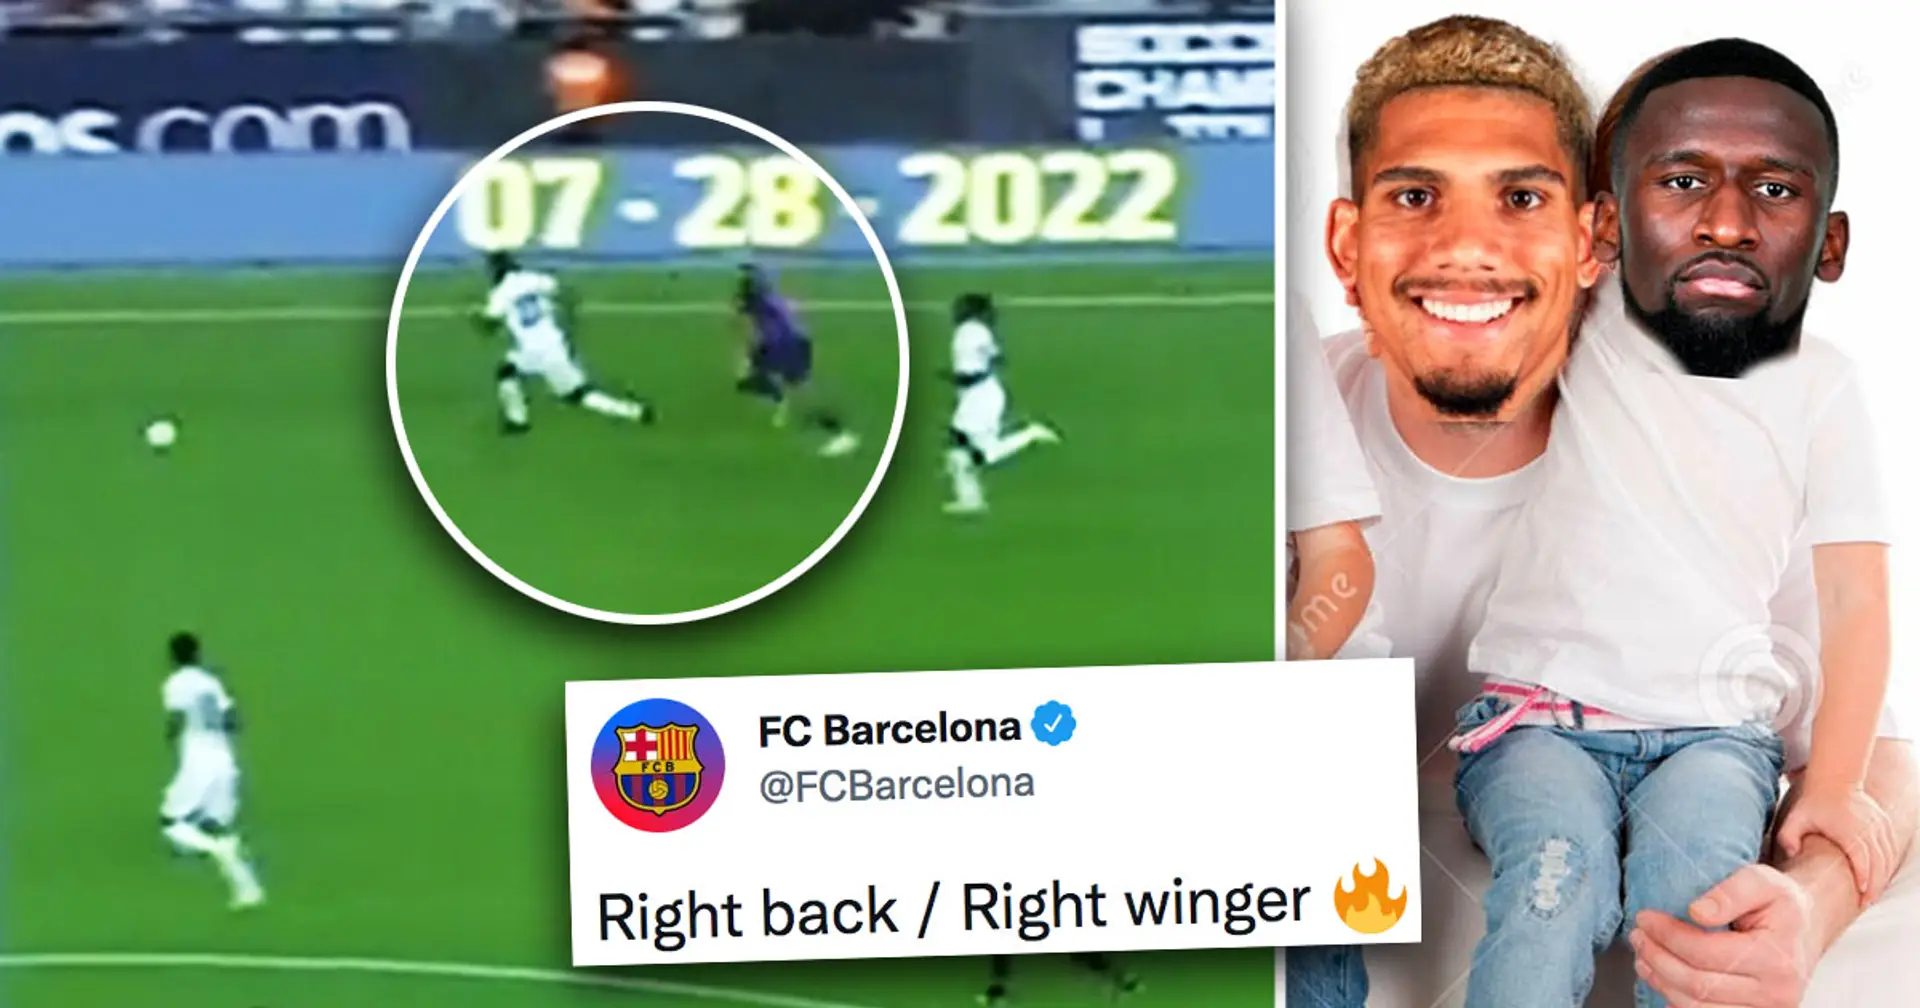 'They told him he was the fastest CB in Premier League': Araujo destroys Rudiger with crazy run in Clasico